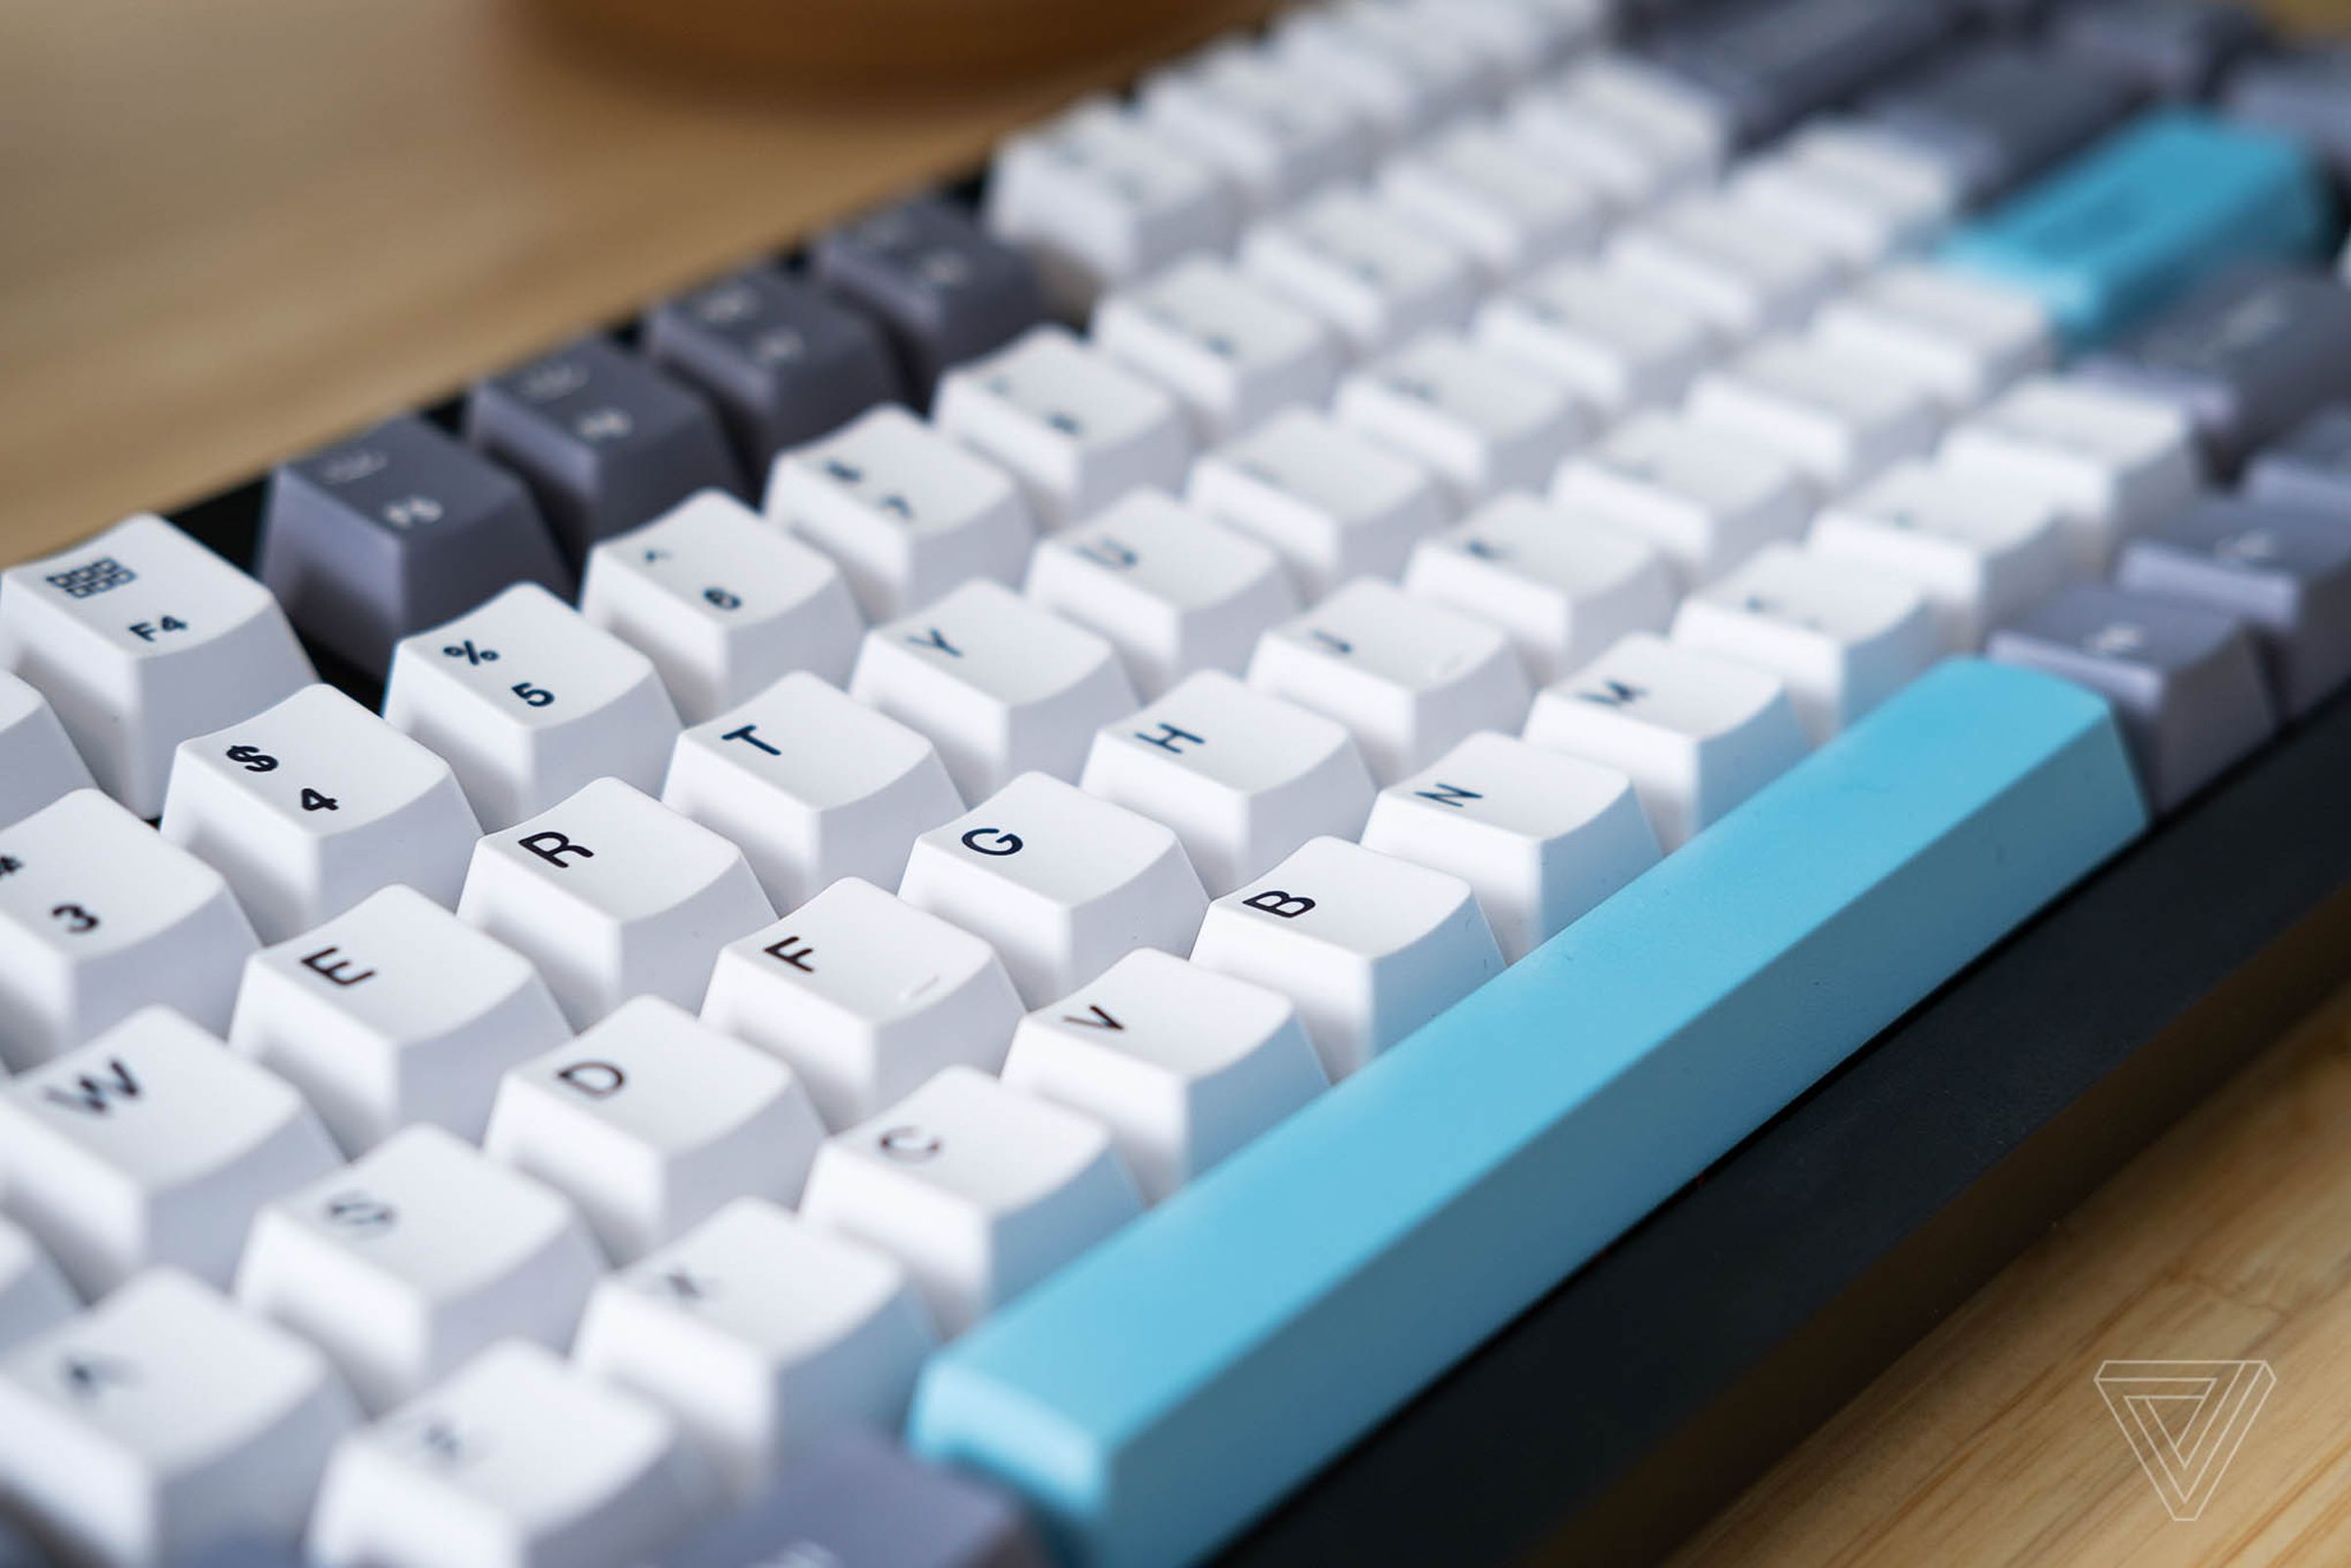 Keychron’s $40 PBT keycaps are good, not great.